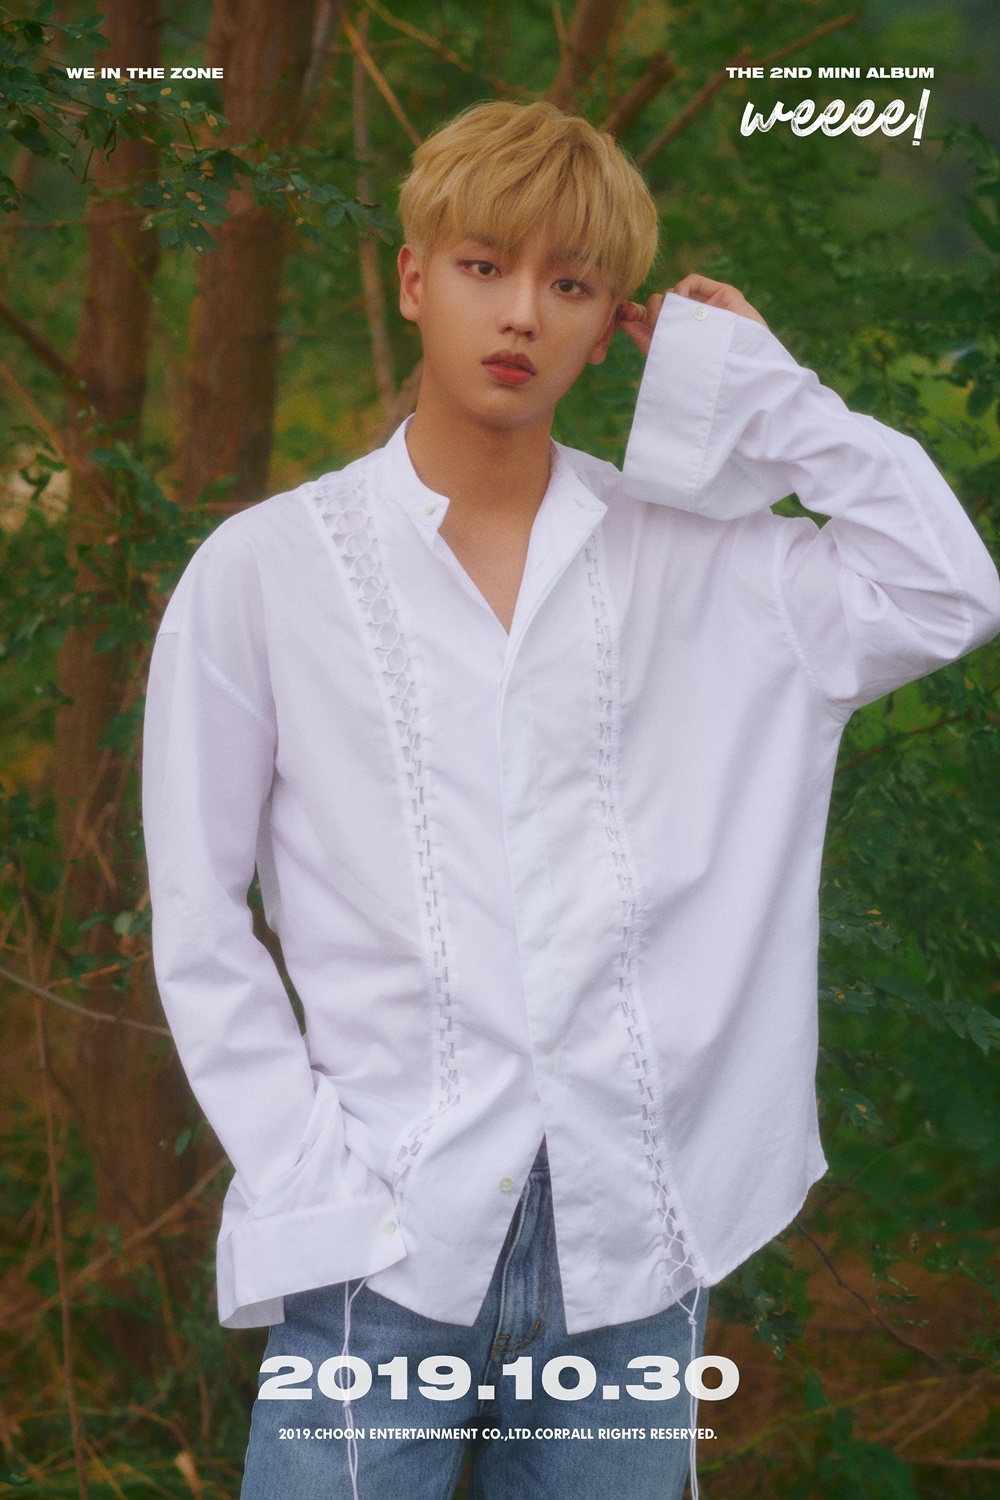 Group Wiindersohn member Eason transformed from mischievous to calm BoyOn the 7th, Isons personal photo teaser was released through the official SNS channel of Wiinder Zone.In the public photo, Eson is wearing a white shirt and jeans and showing the face of a real boyfriend, and is also showing off his charm with a natural pose with his hand in his pocket.Eason is also announcing a new transform with a refreshing atmosphere and calmness that have changed from before.Wiinder Zone, which announced its comeback with Weeee! (above), is raising fans curiosity by releasing various contents sequentially.The second mini album Weeee!, which offers a glimpse of the transform of Wiinder Zone, will be released on various music sites at 6 pm on the 30th.Photo = Chun Entertainment